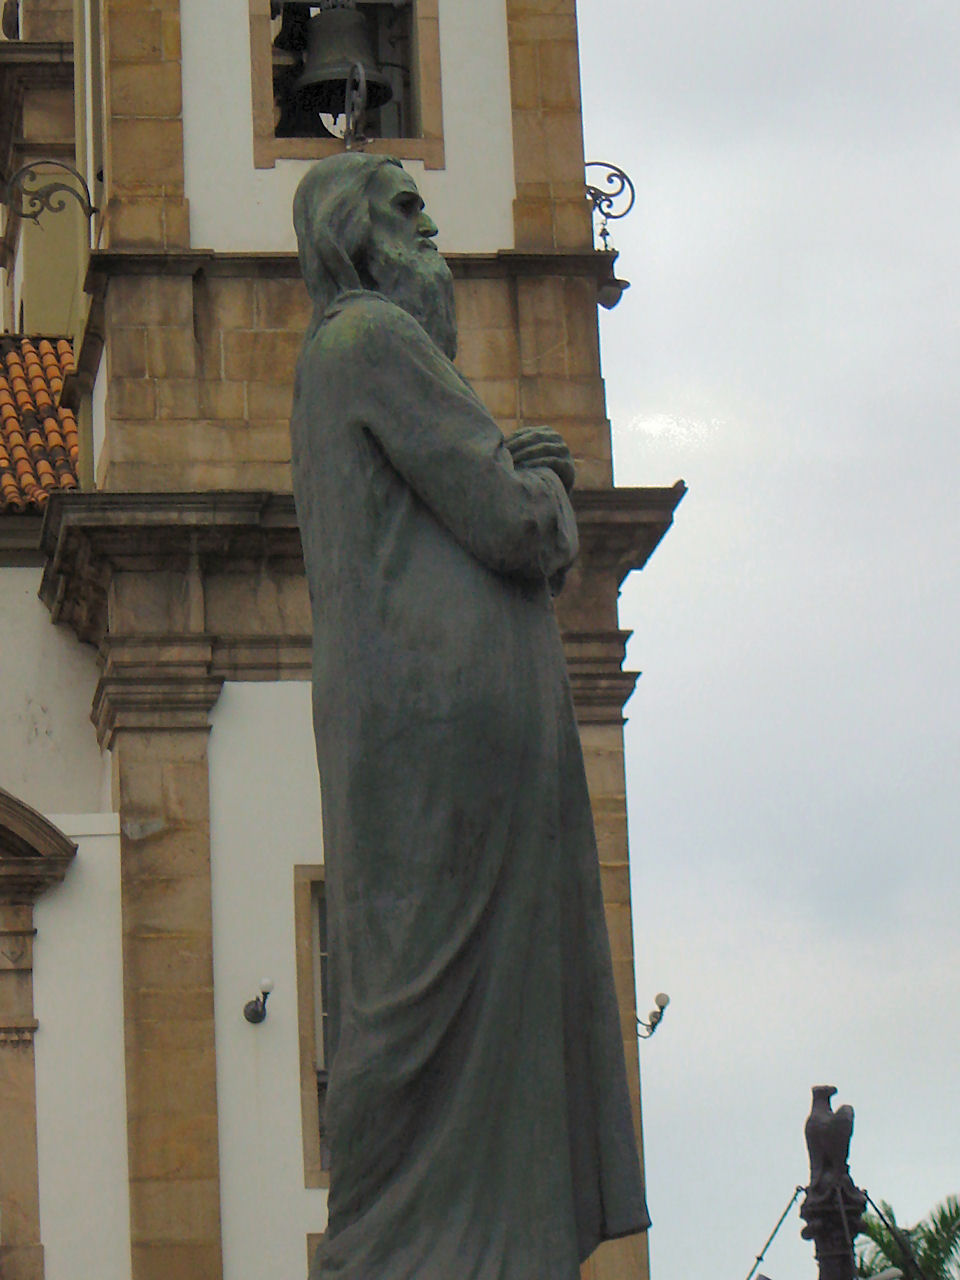 the statue is holding the bell tower in the daytime